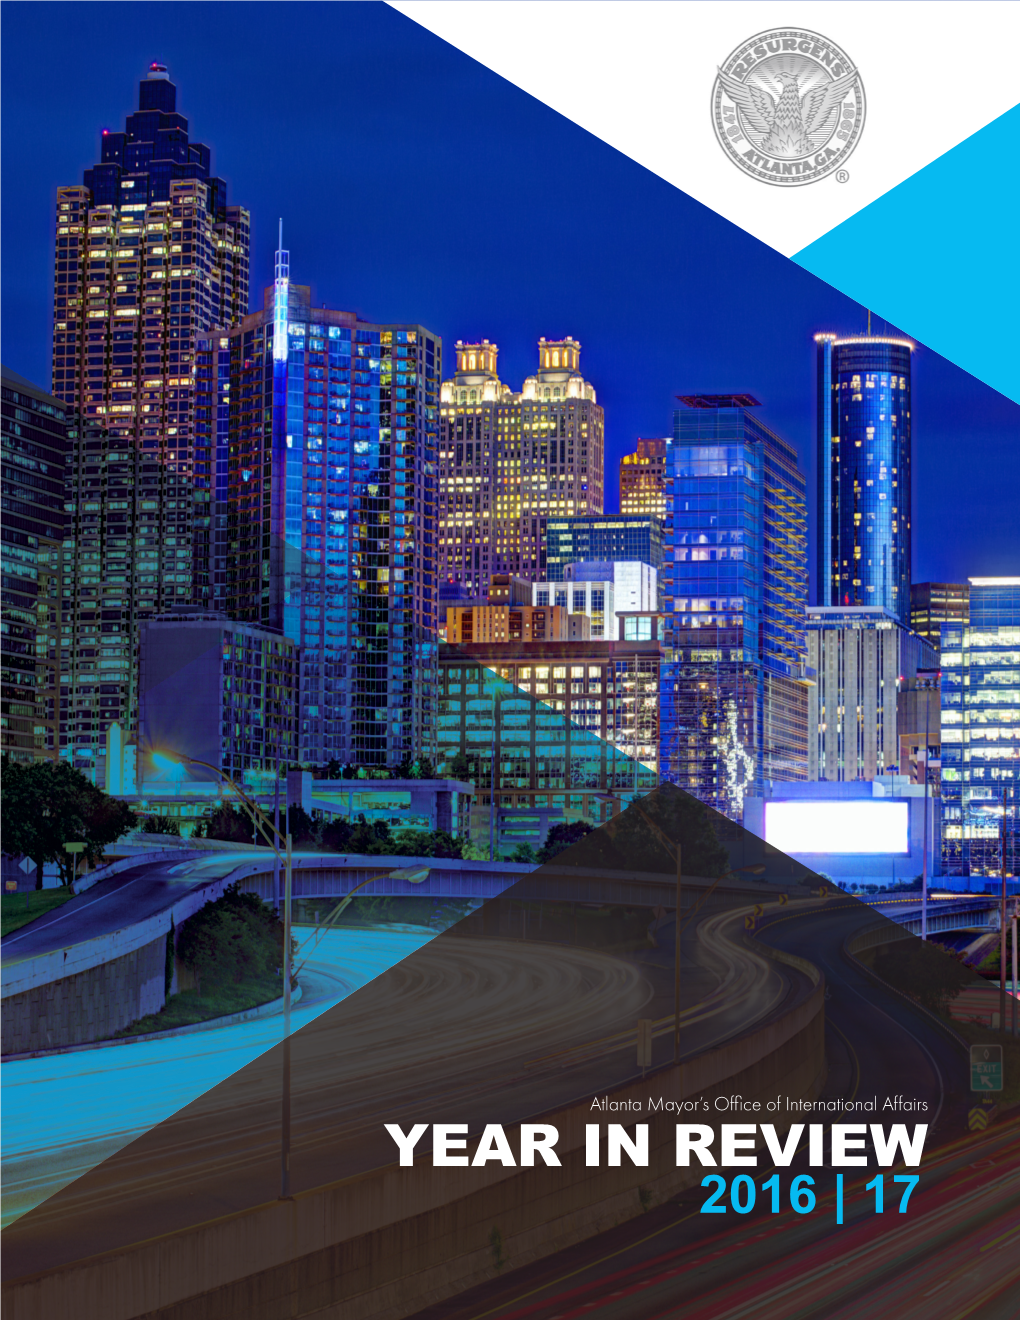 YEAR in REVIEW 2016 | 17 Letter from Mayor Kasim Reed